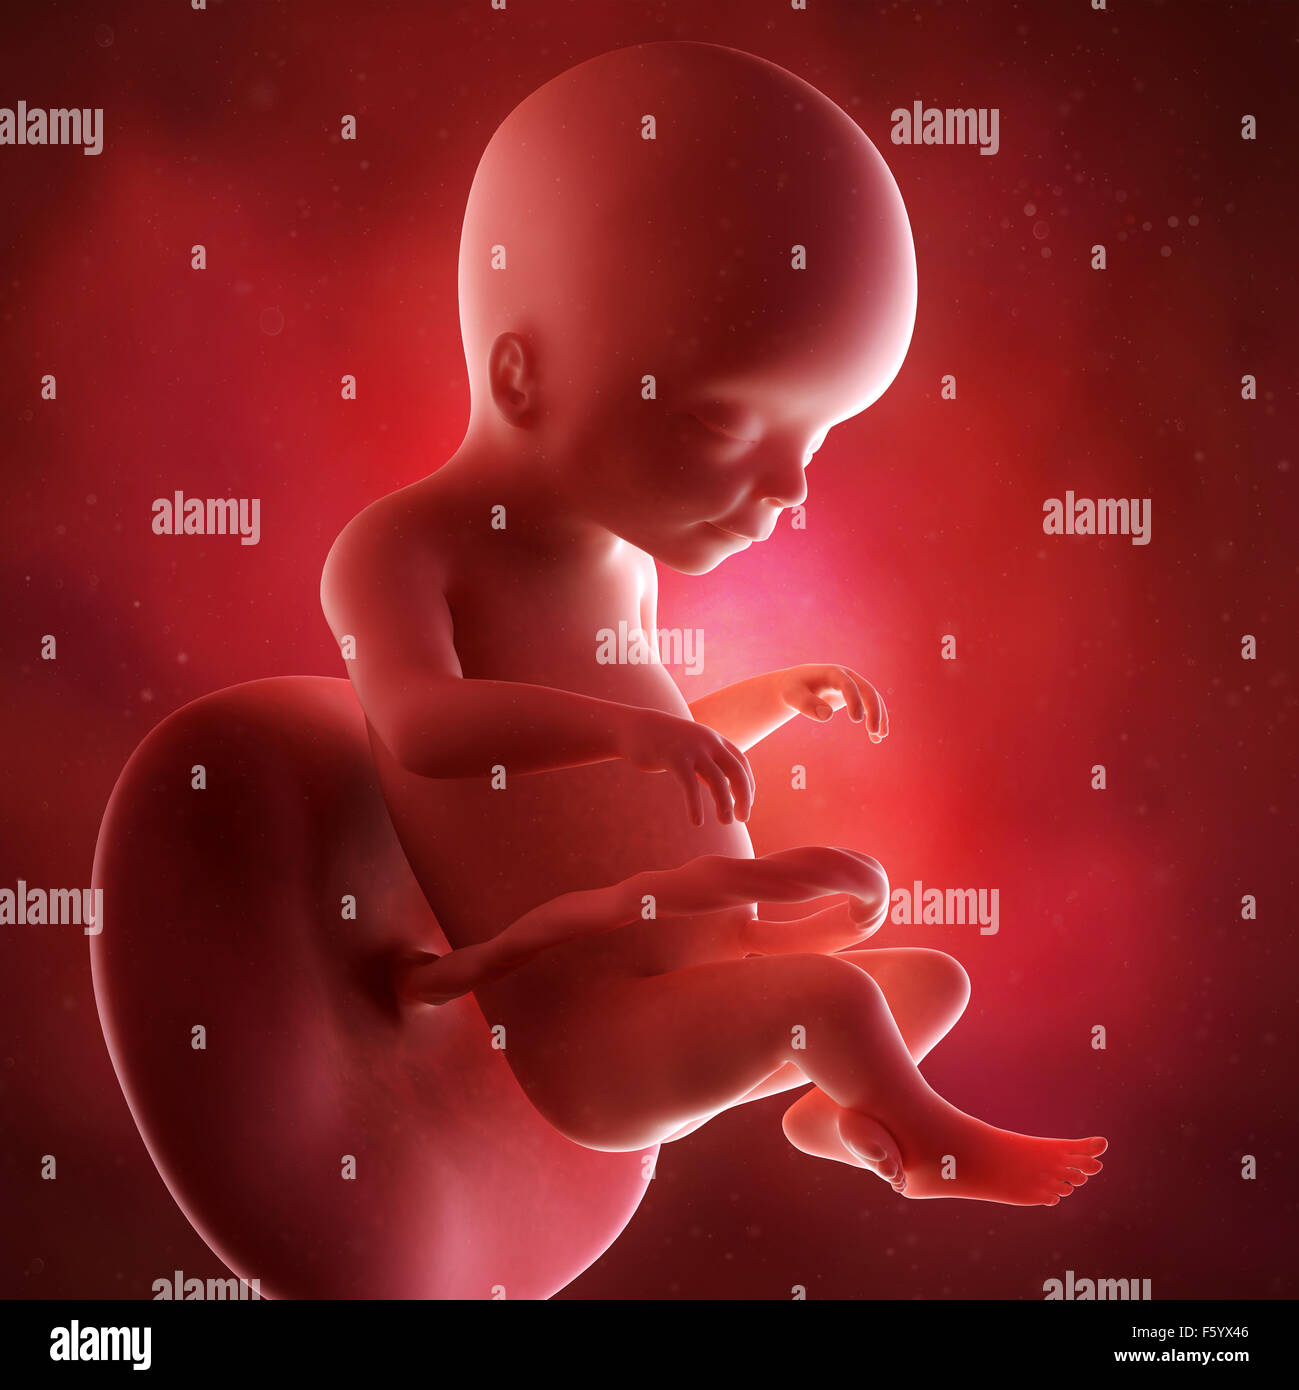 medical accurate 3d illustration of a fetus week 20 Stock Photo